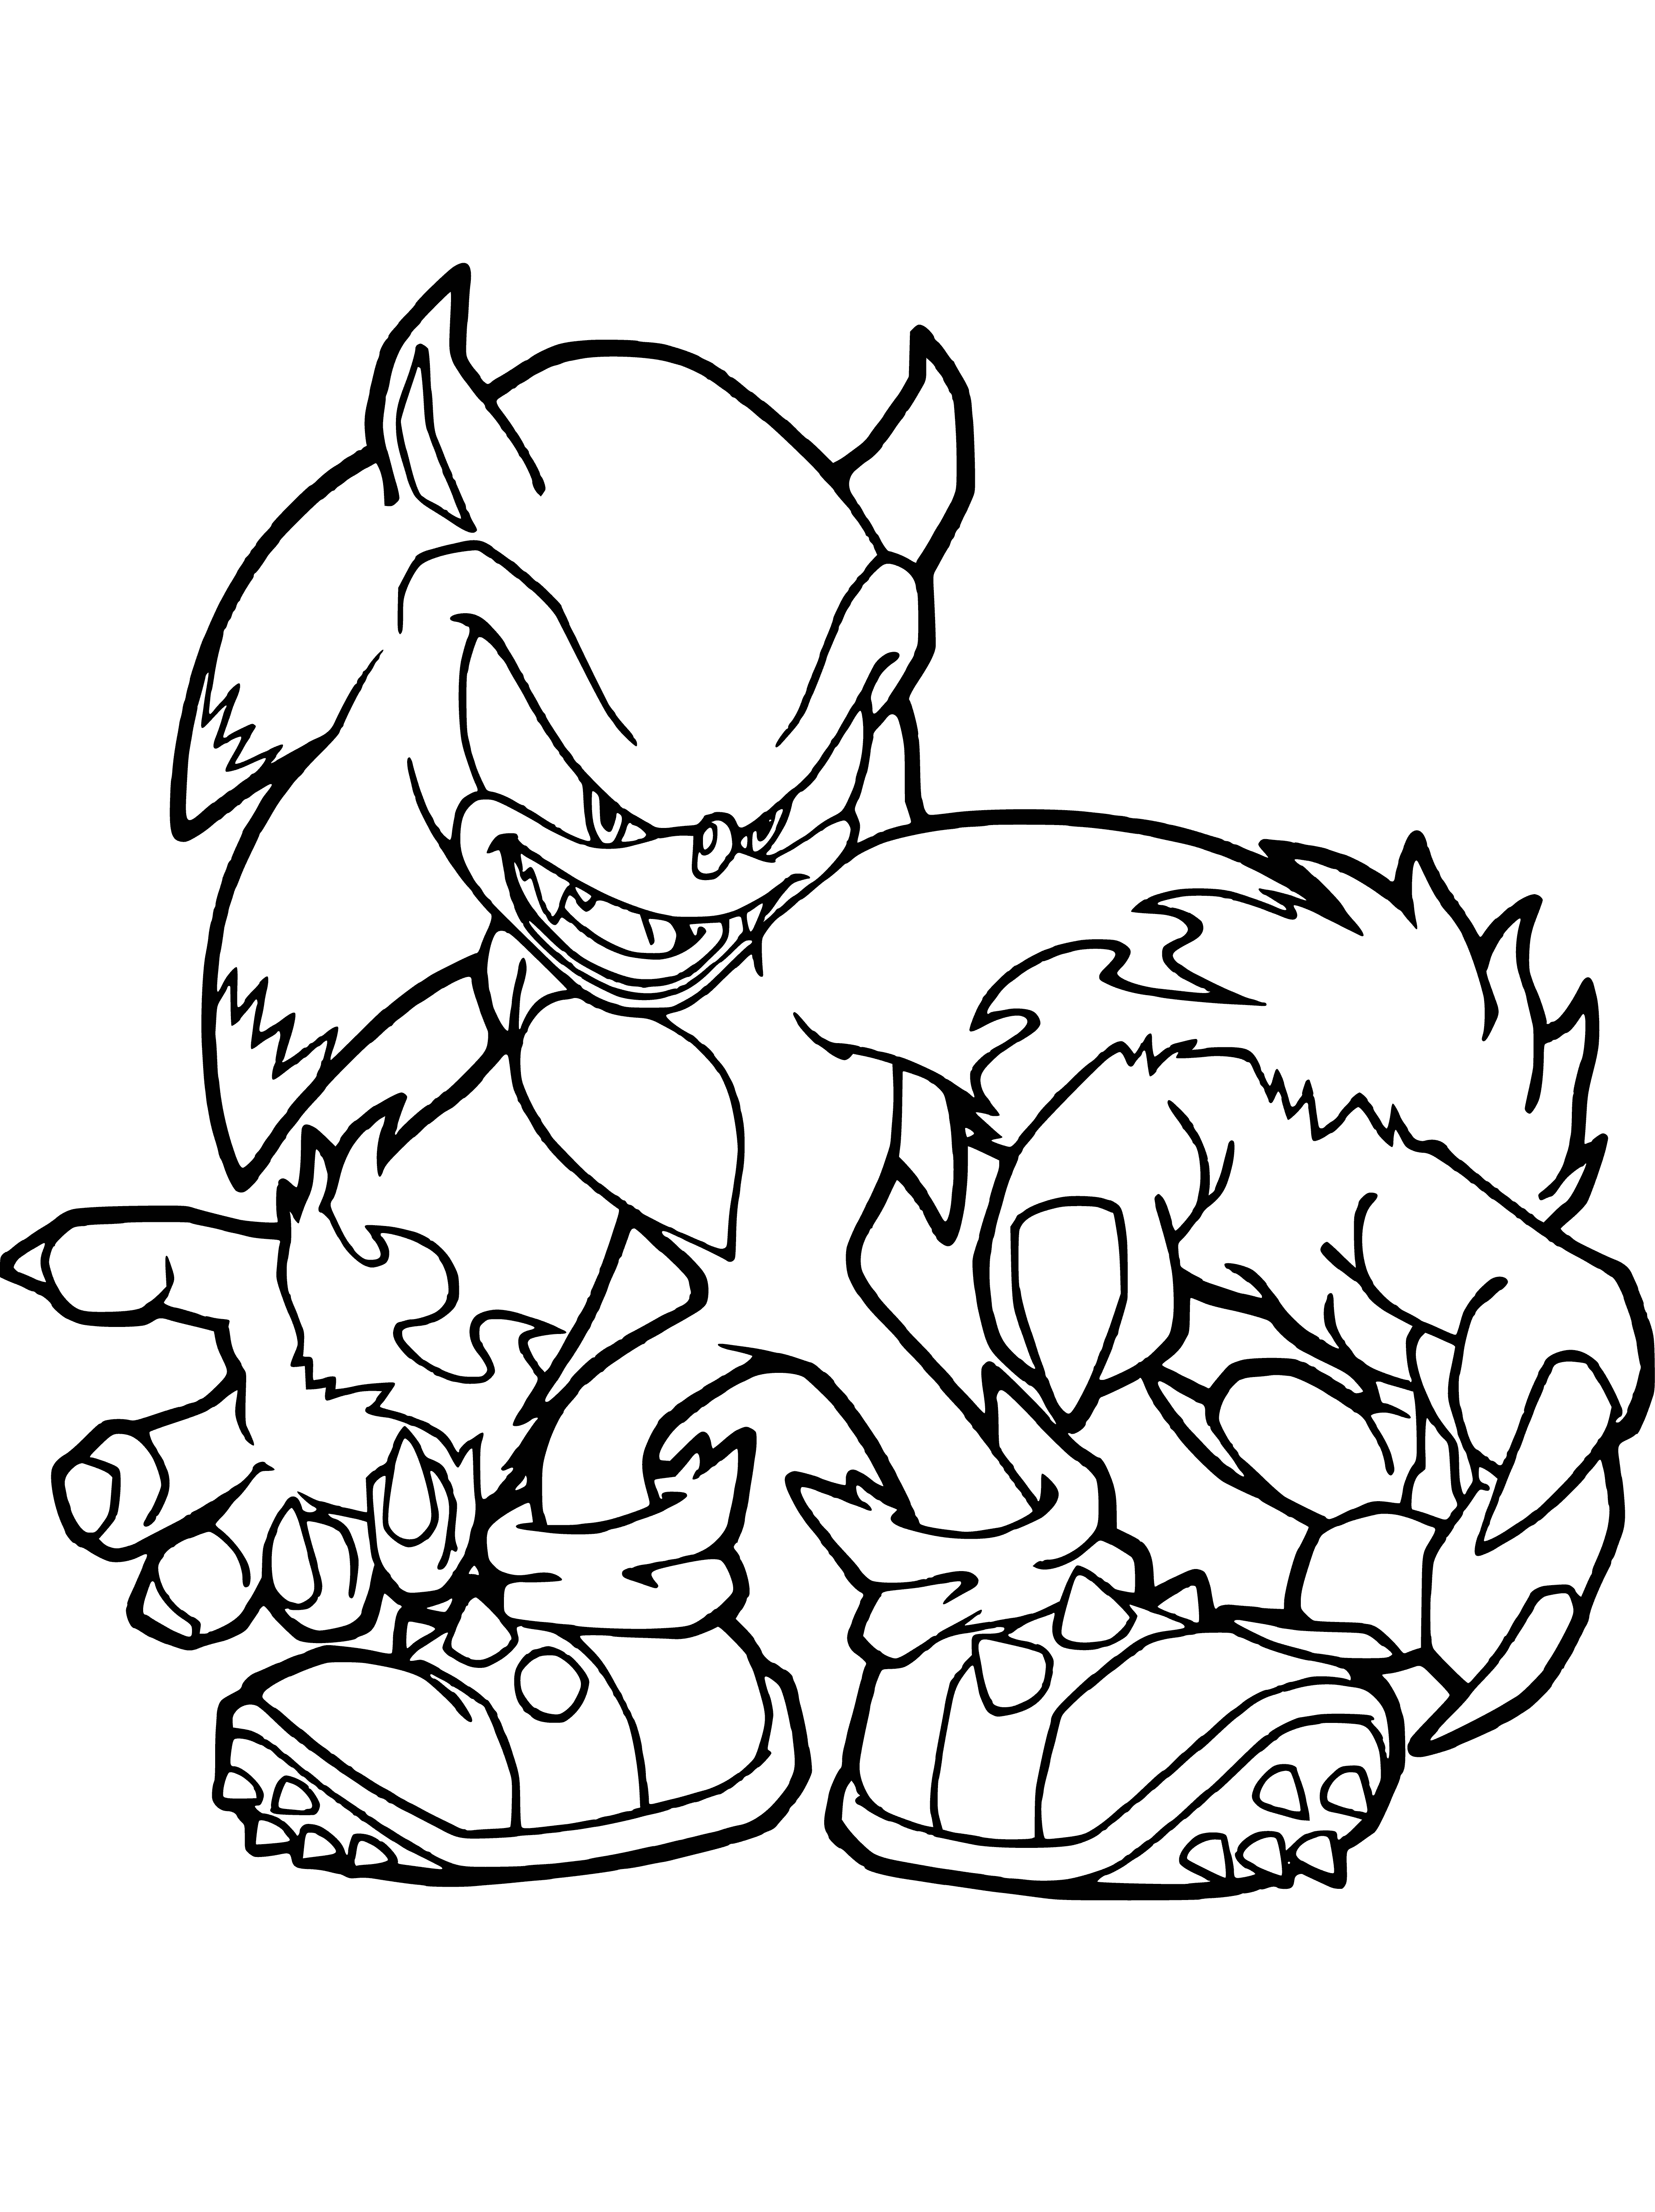 Sonic Unleashed coloring page